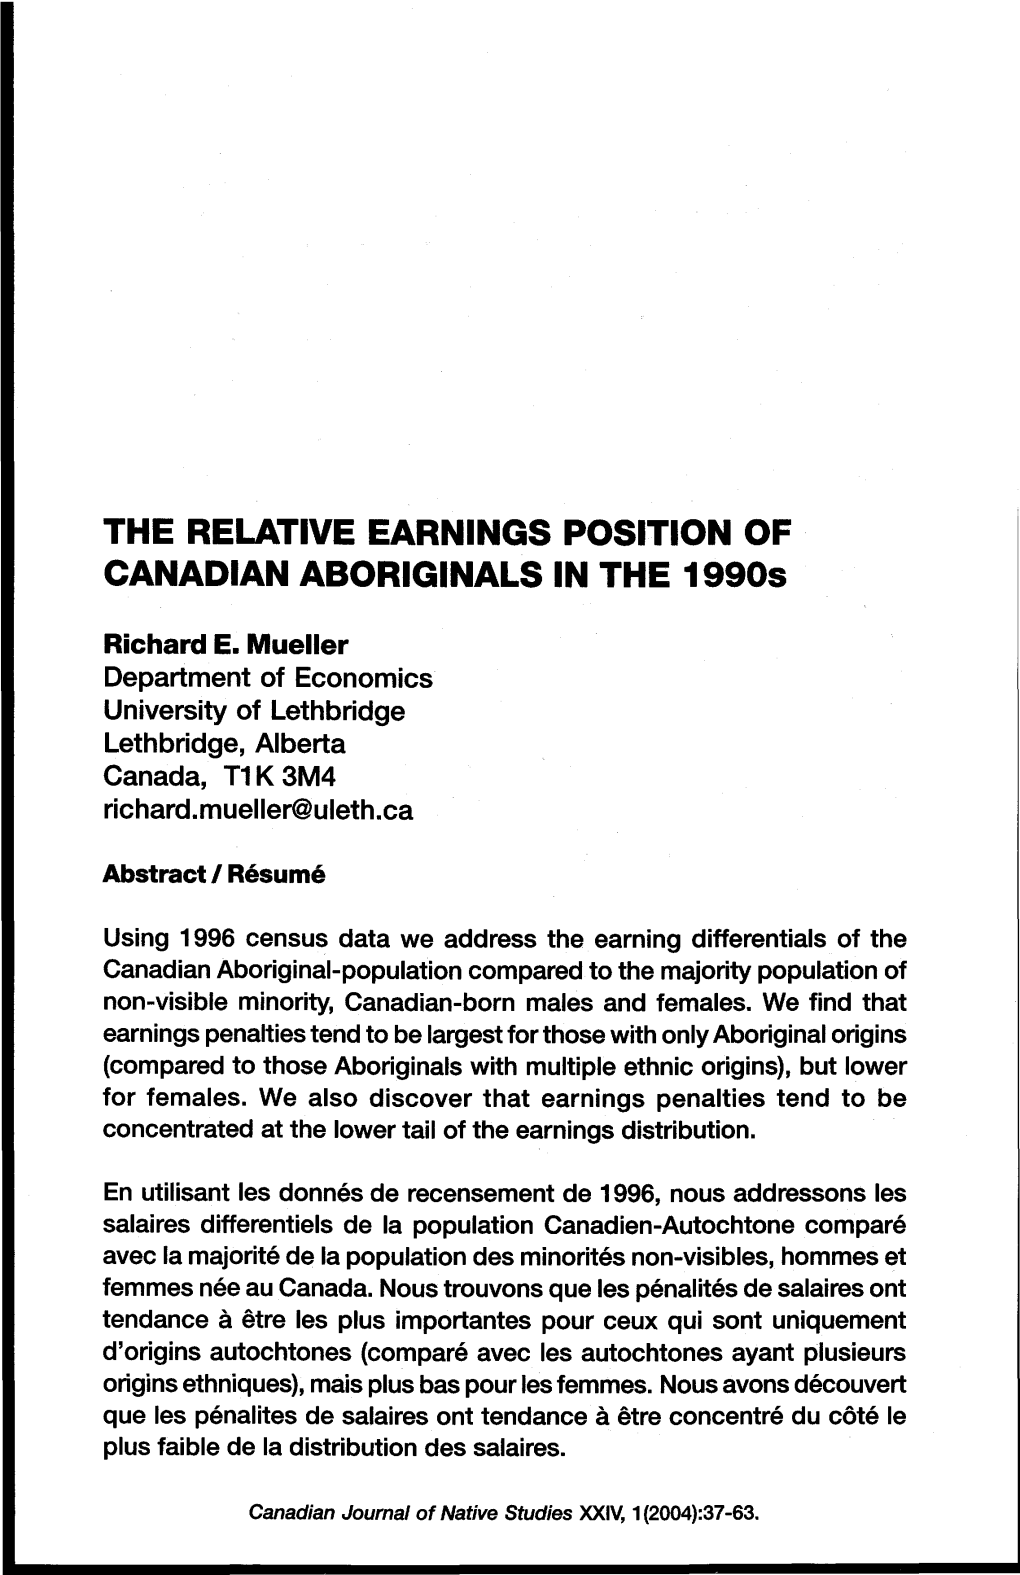 The Relative Earnings Position of Canadian Aboriginals in the 19905